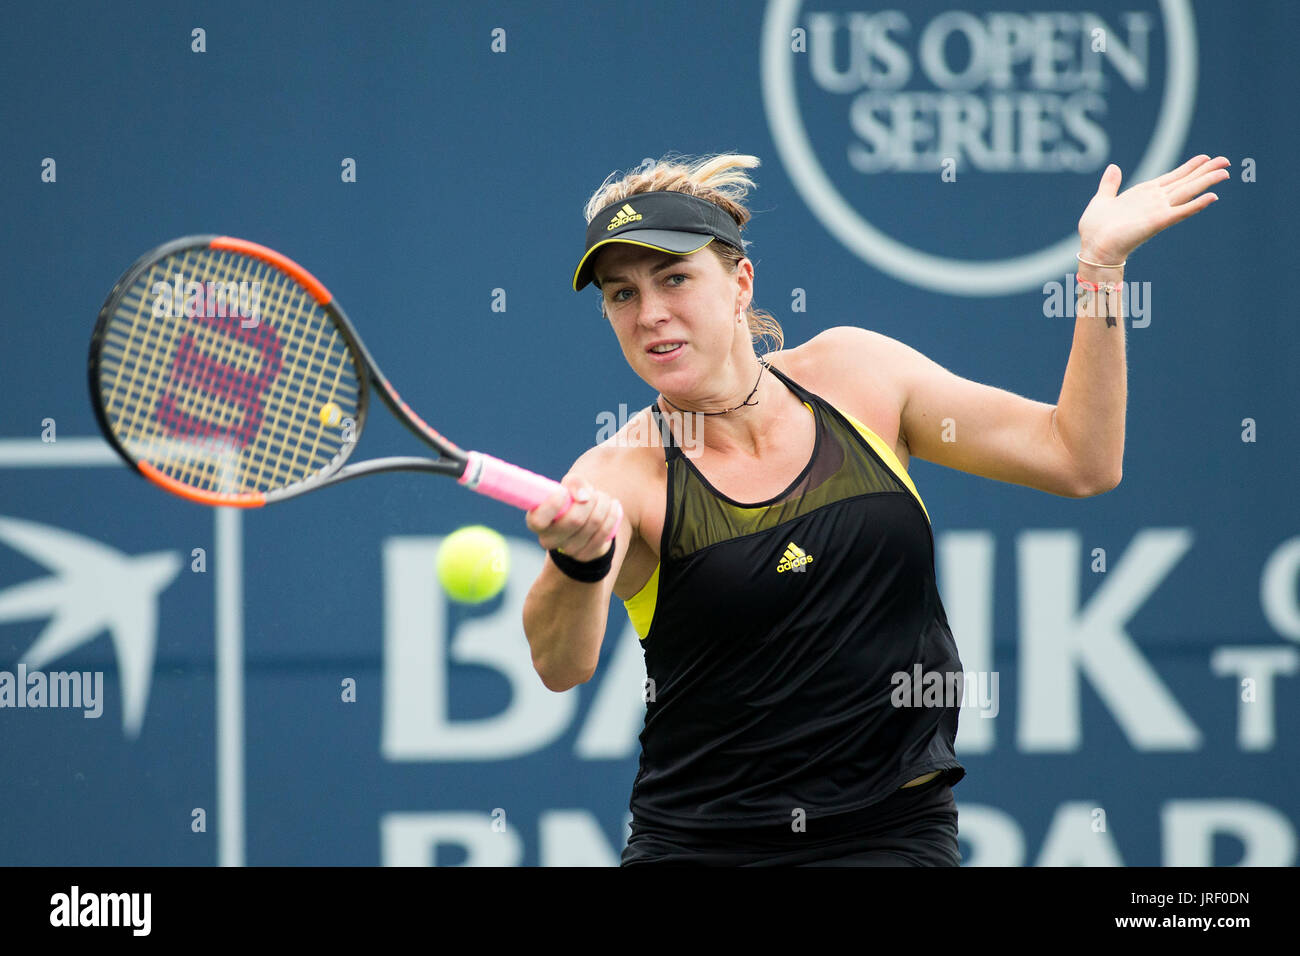 August 04, 2017: Anastasia Pavlyuchenkova (RUS) was defeated by CoCo Vandeweghe (USA) 6-2, 6-3 at the Bank of the West Classic being played at the Taube Tennis Stadium in Stanford, California. © Mal Taam/TennisClix Stock Photo